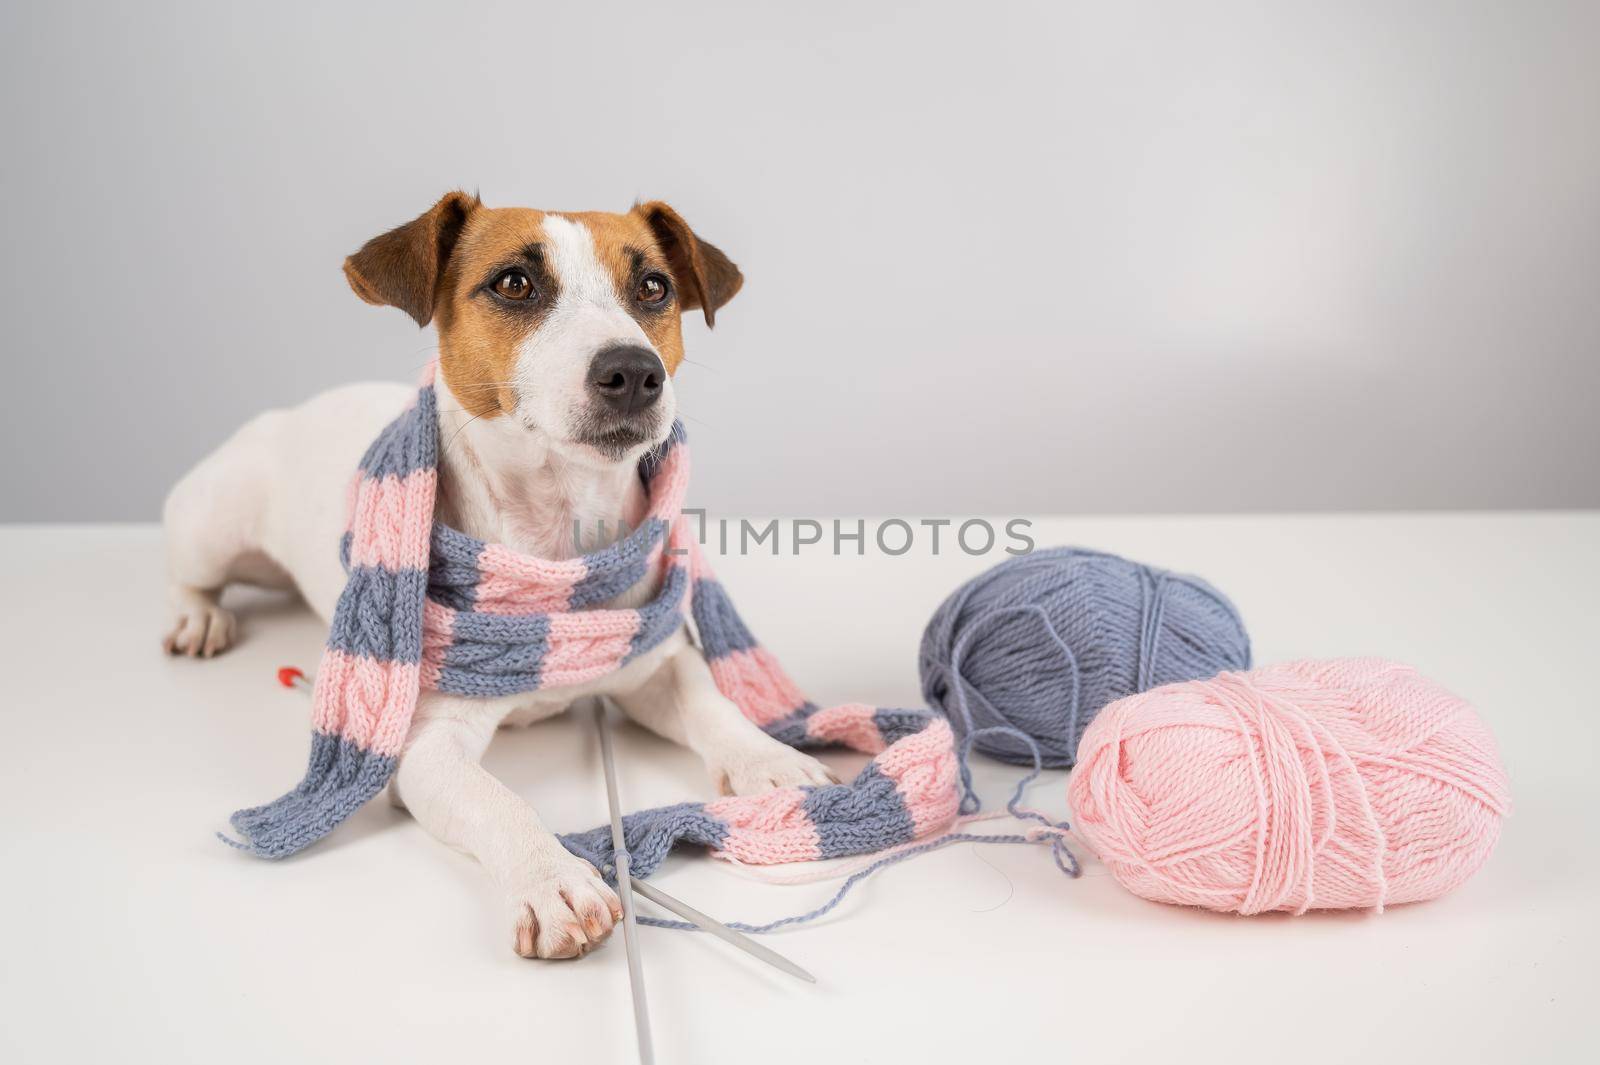 Dog jack russell terrier knits a knitted scarf on a white background. by mrwed54